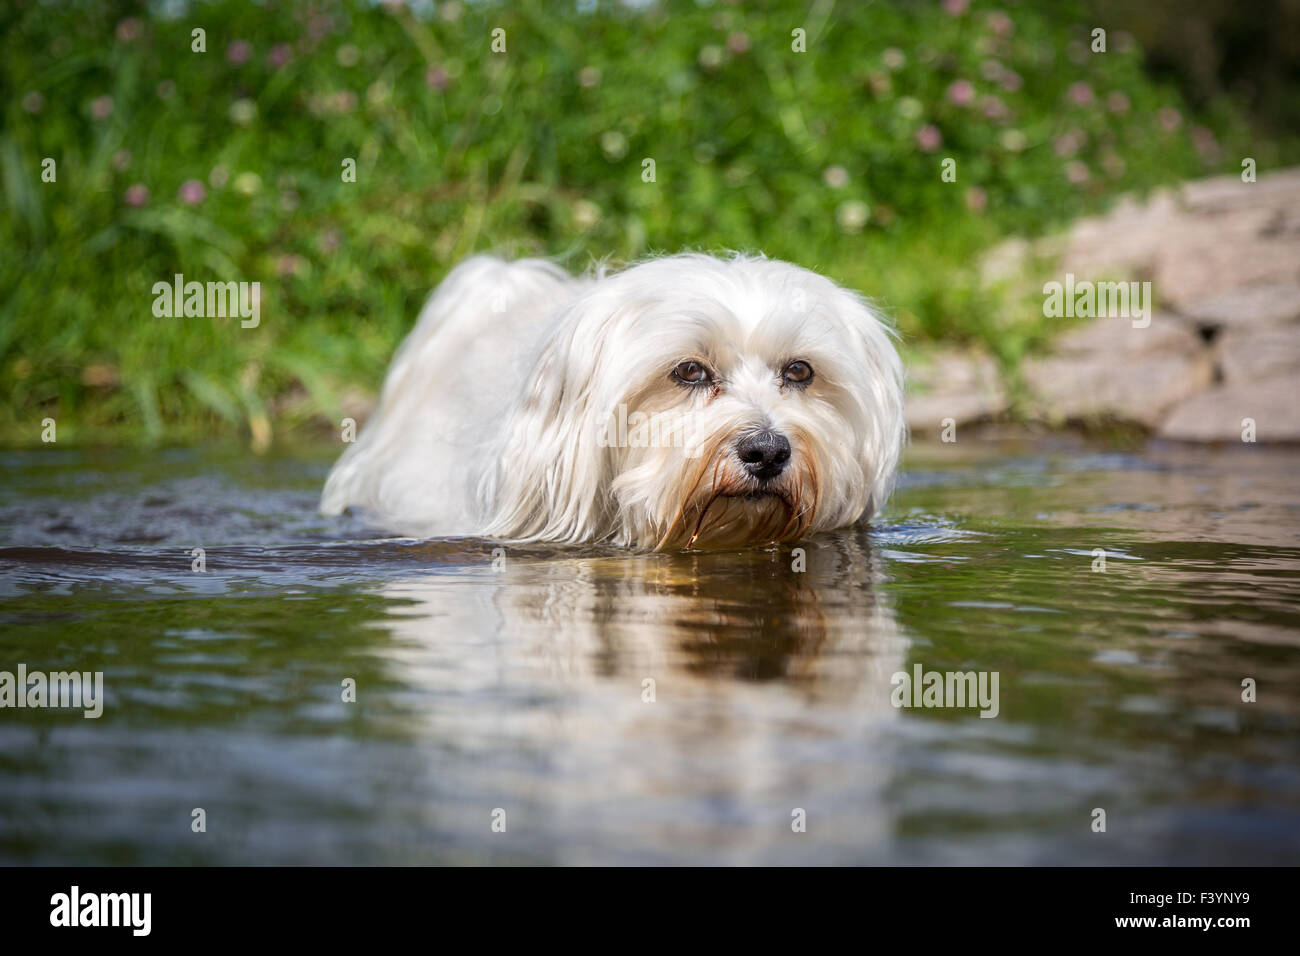 Little dog in water Stock Photo